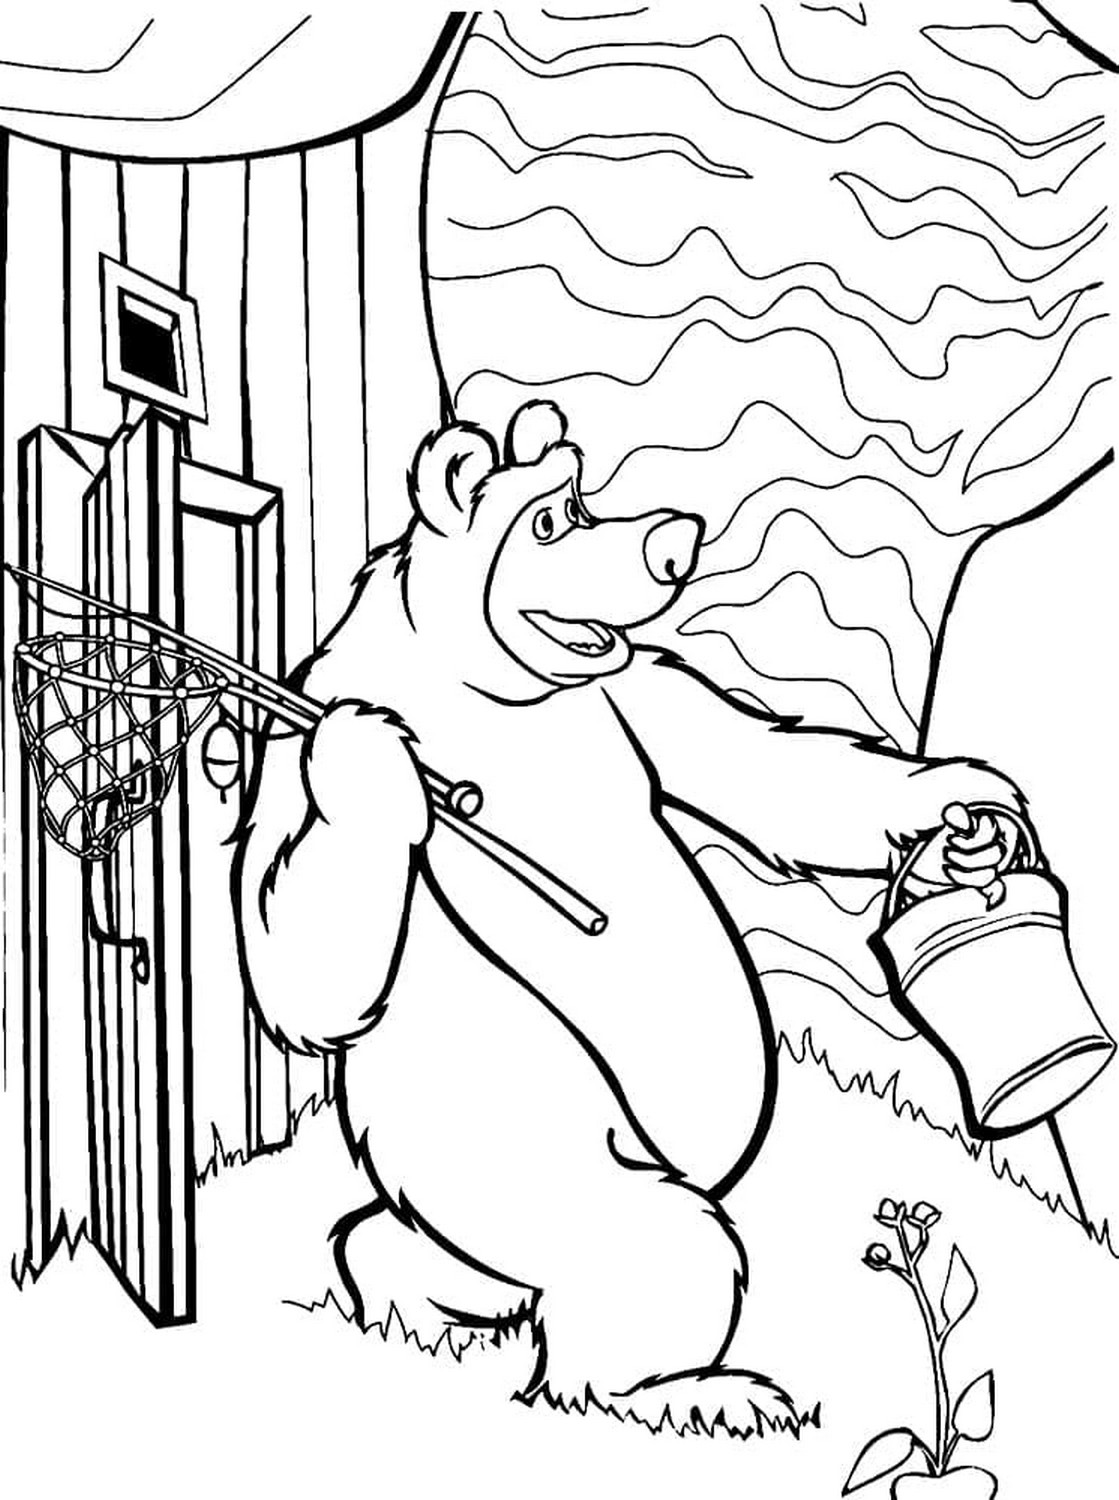 Mascha und der Br 84  coloring page to print and coloring